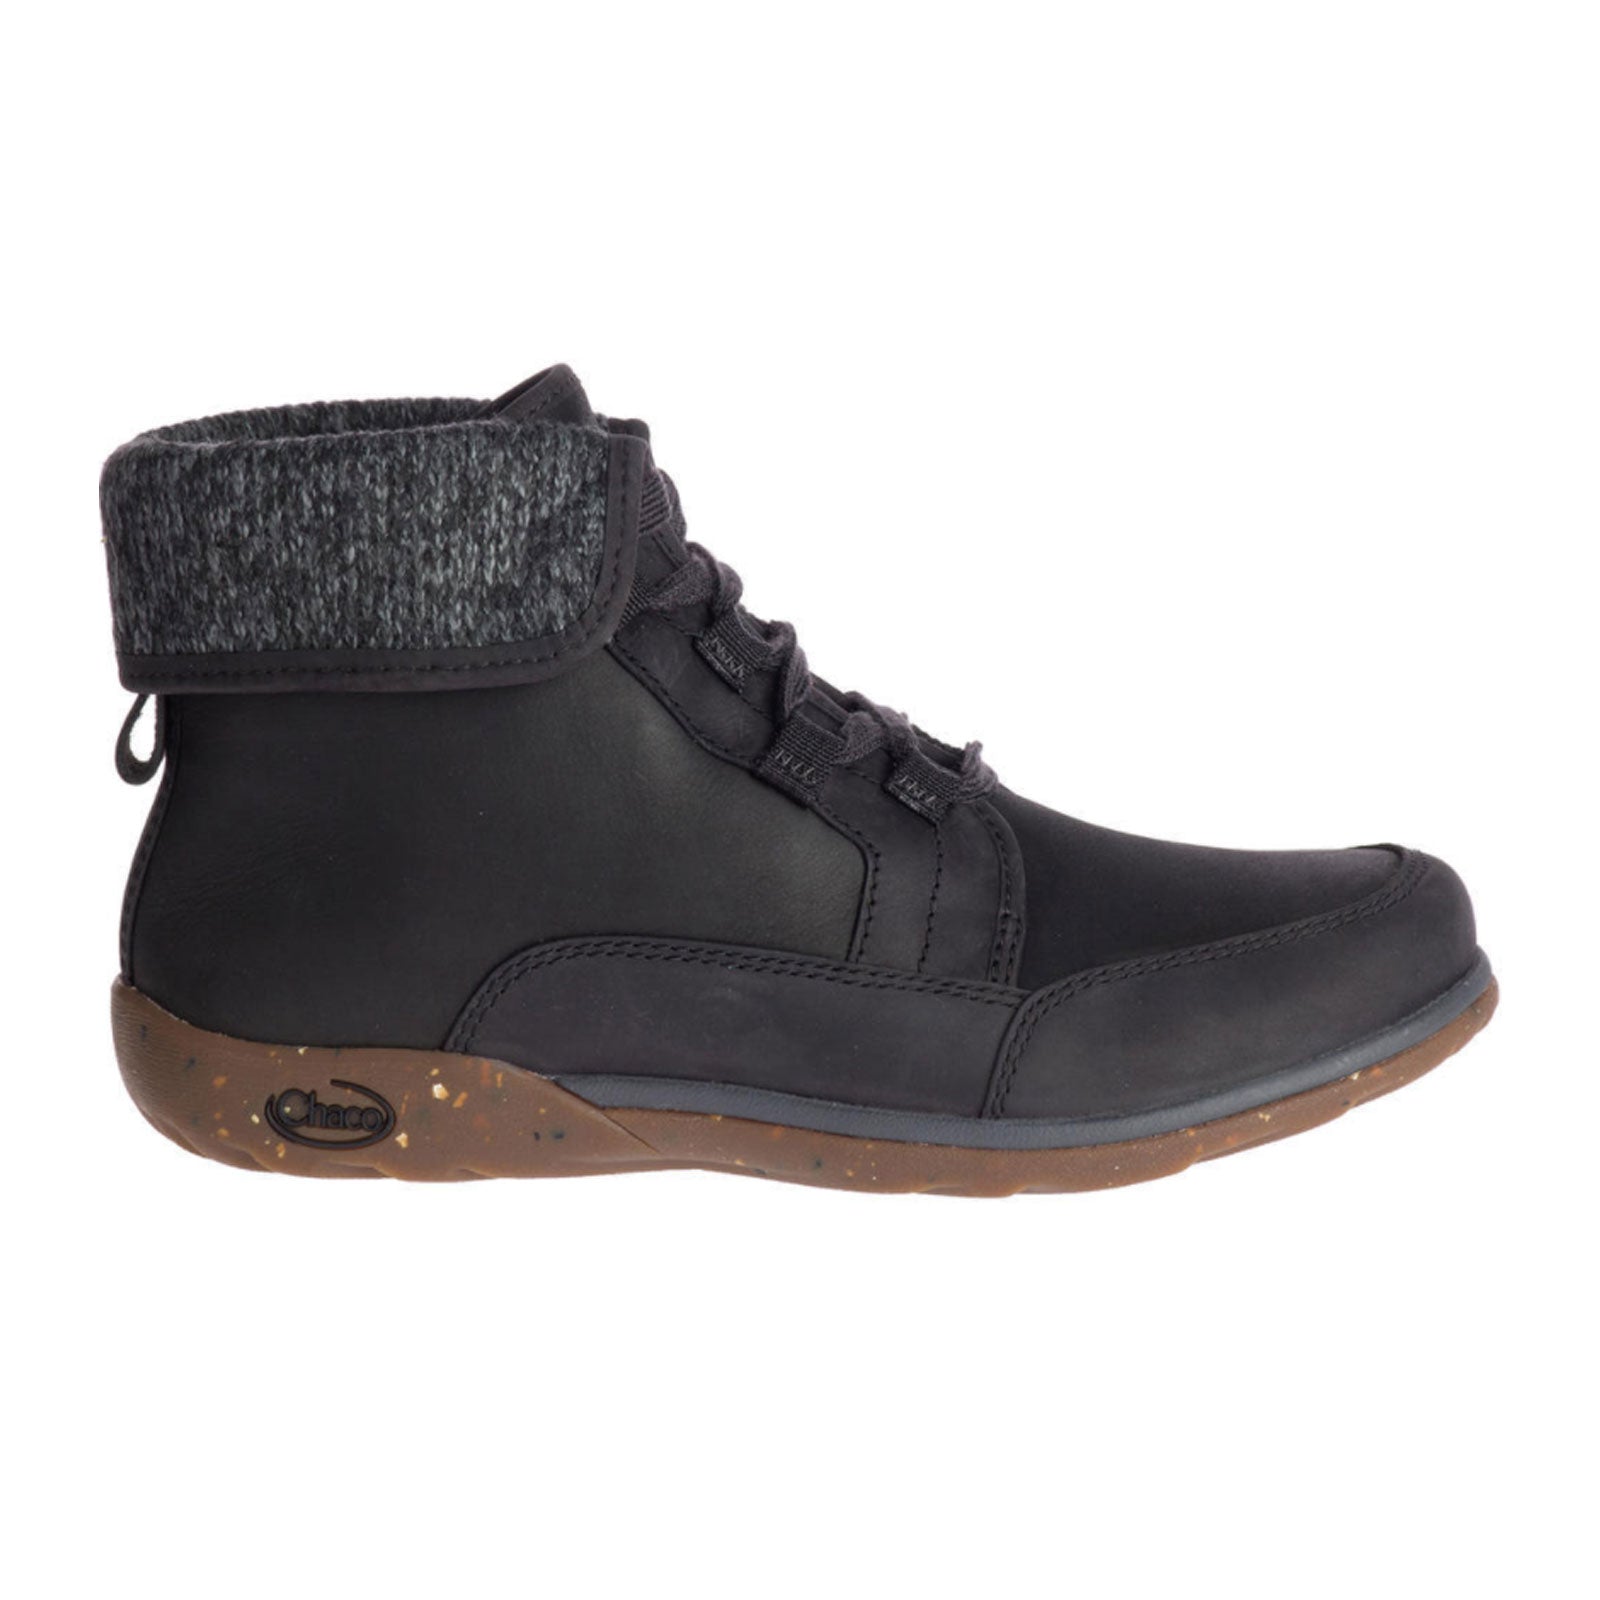 Chaco Barbary Ankle Boot (Women) - Black Iron Boots - Fashion - Ankle Boot - The Heel Shoe Fitters